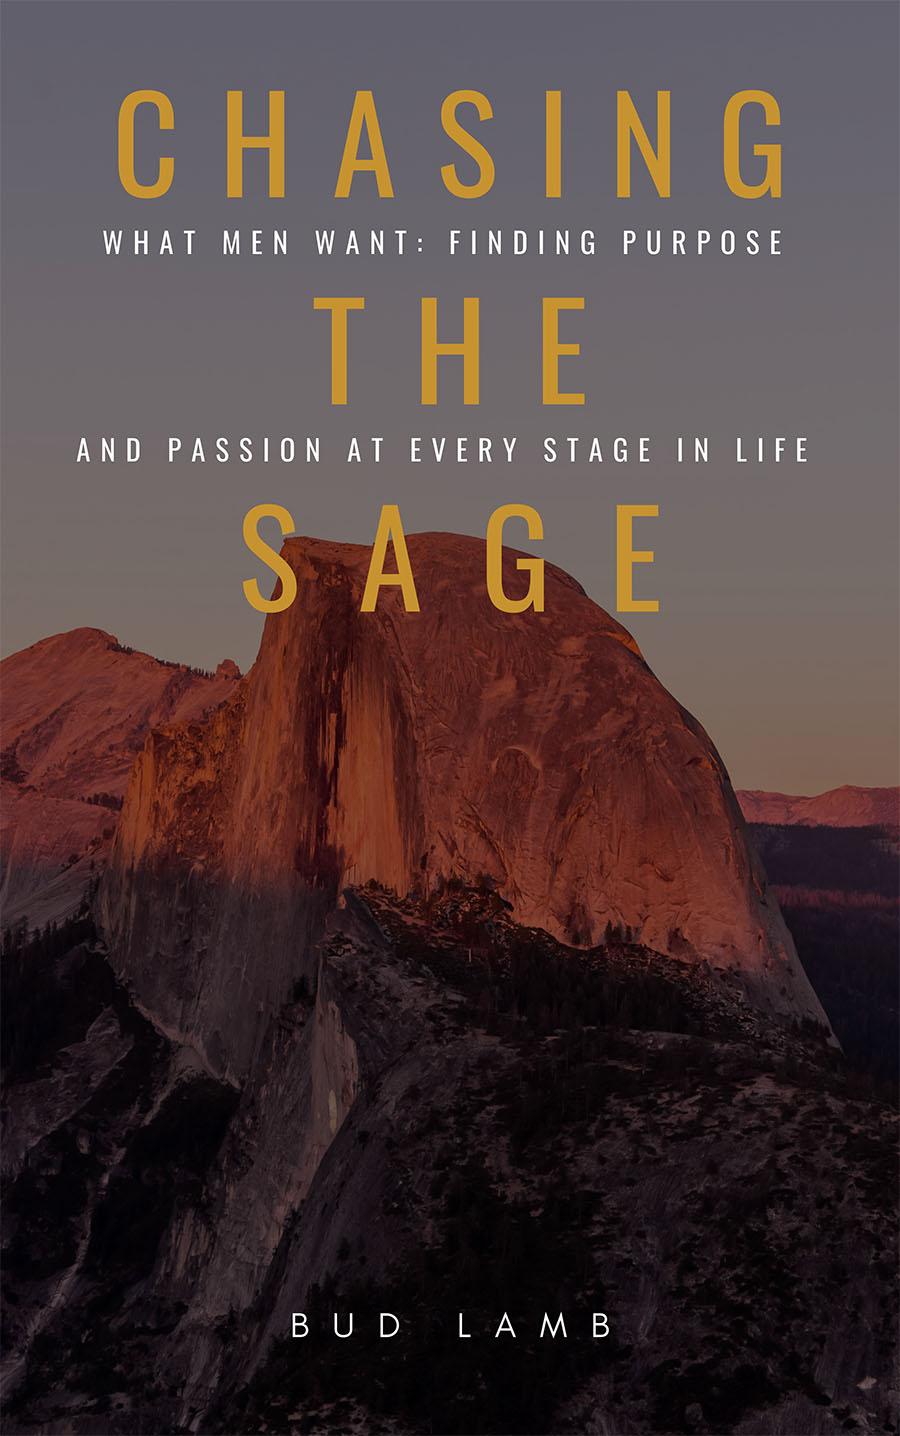 Chasing the Sage by Bud Lamb